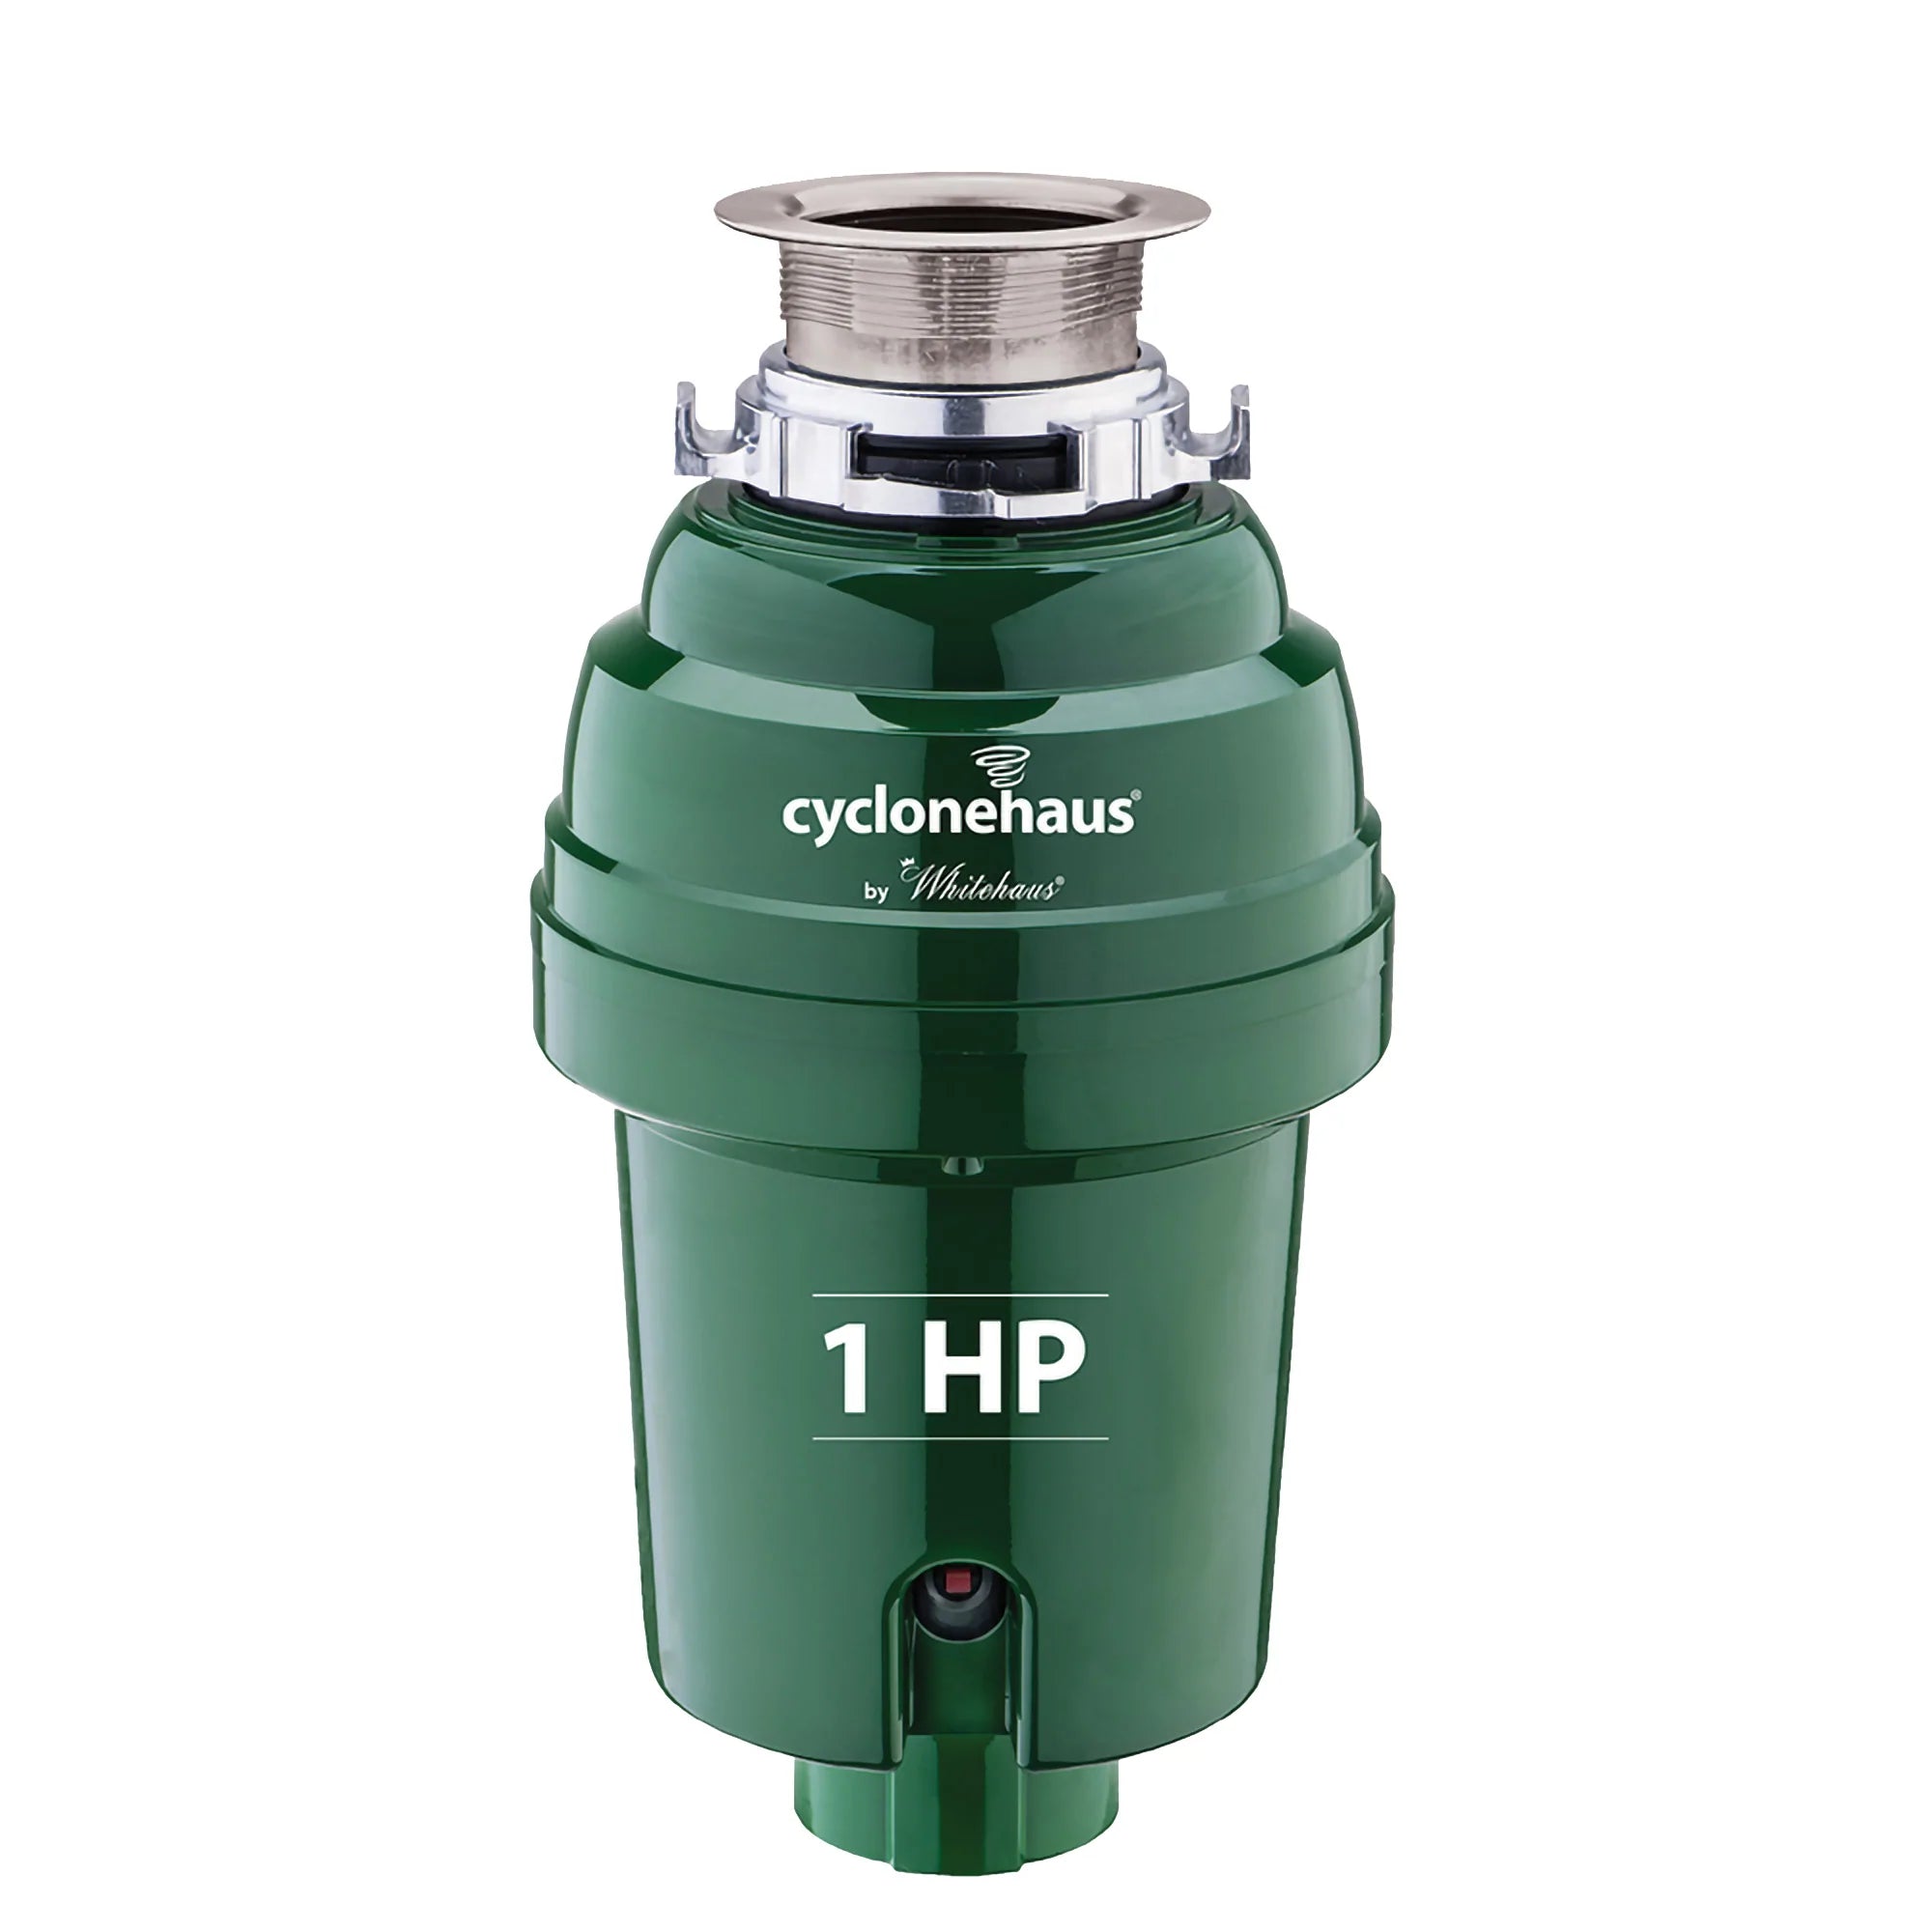 WHITEHAUS Cyclonehaus High Efficiency Garbage Disposal with Solid Stainless Steel Flange and Quiet Operation – WH007